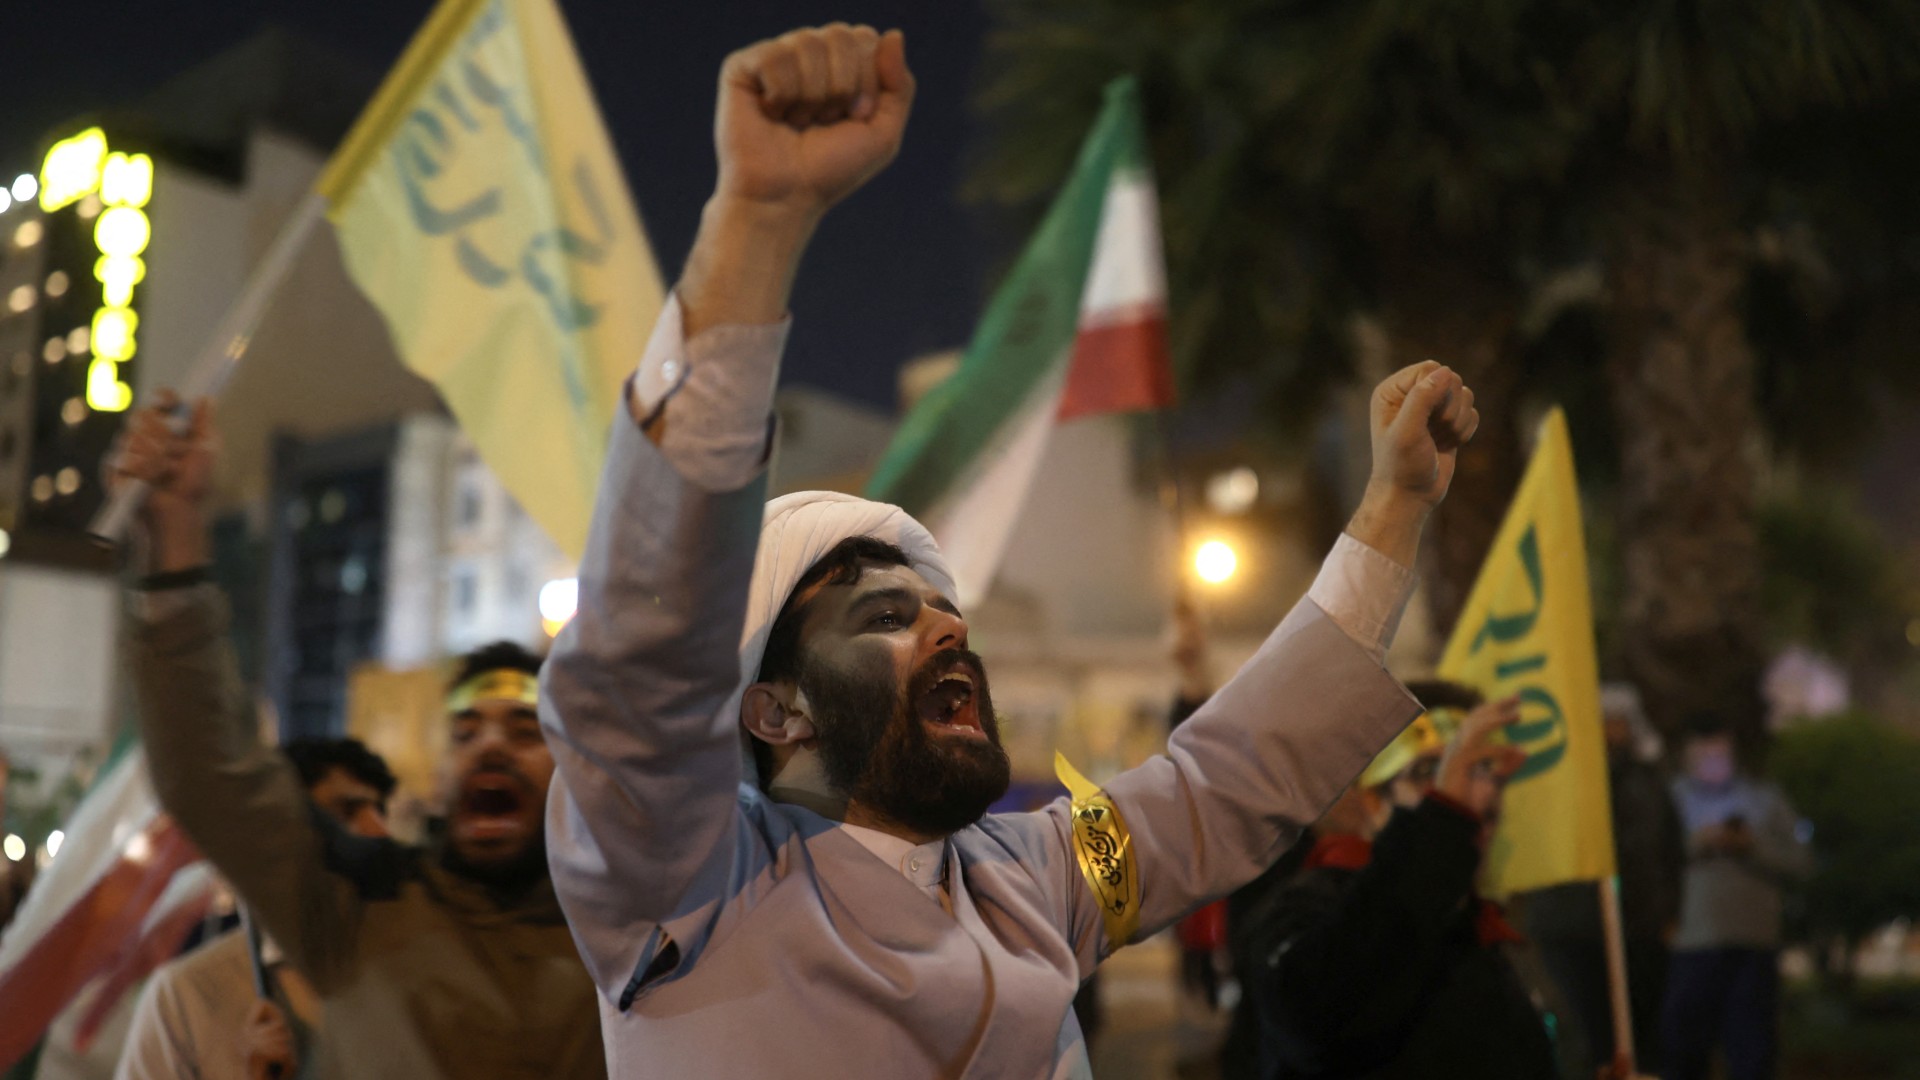 Iranians celebrate on a street, after the IRGC attack on Israel, in Tehran, 14 April (Reuters/Majid Asgaripour/WANA)